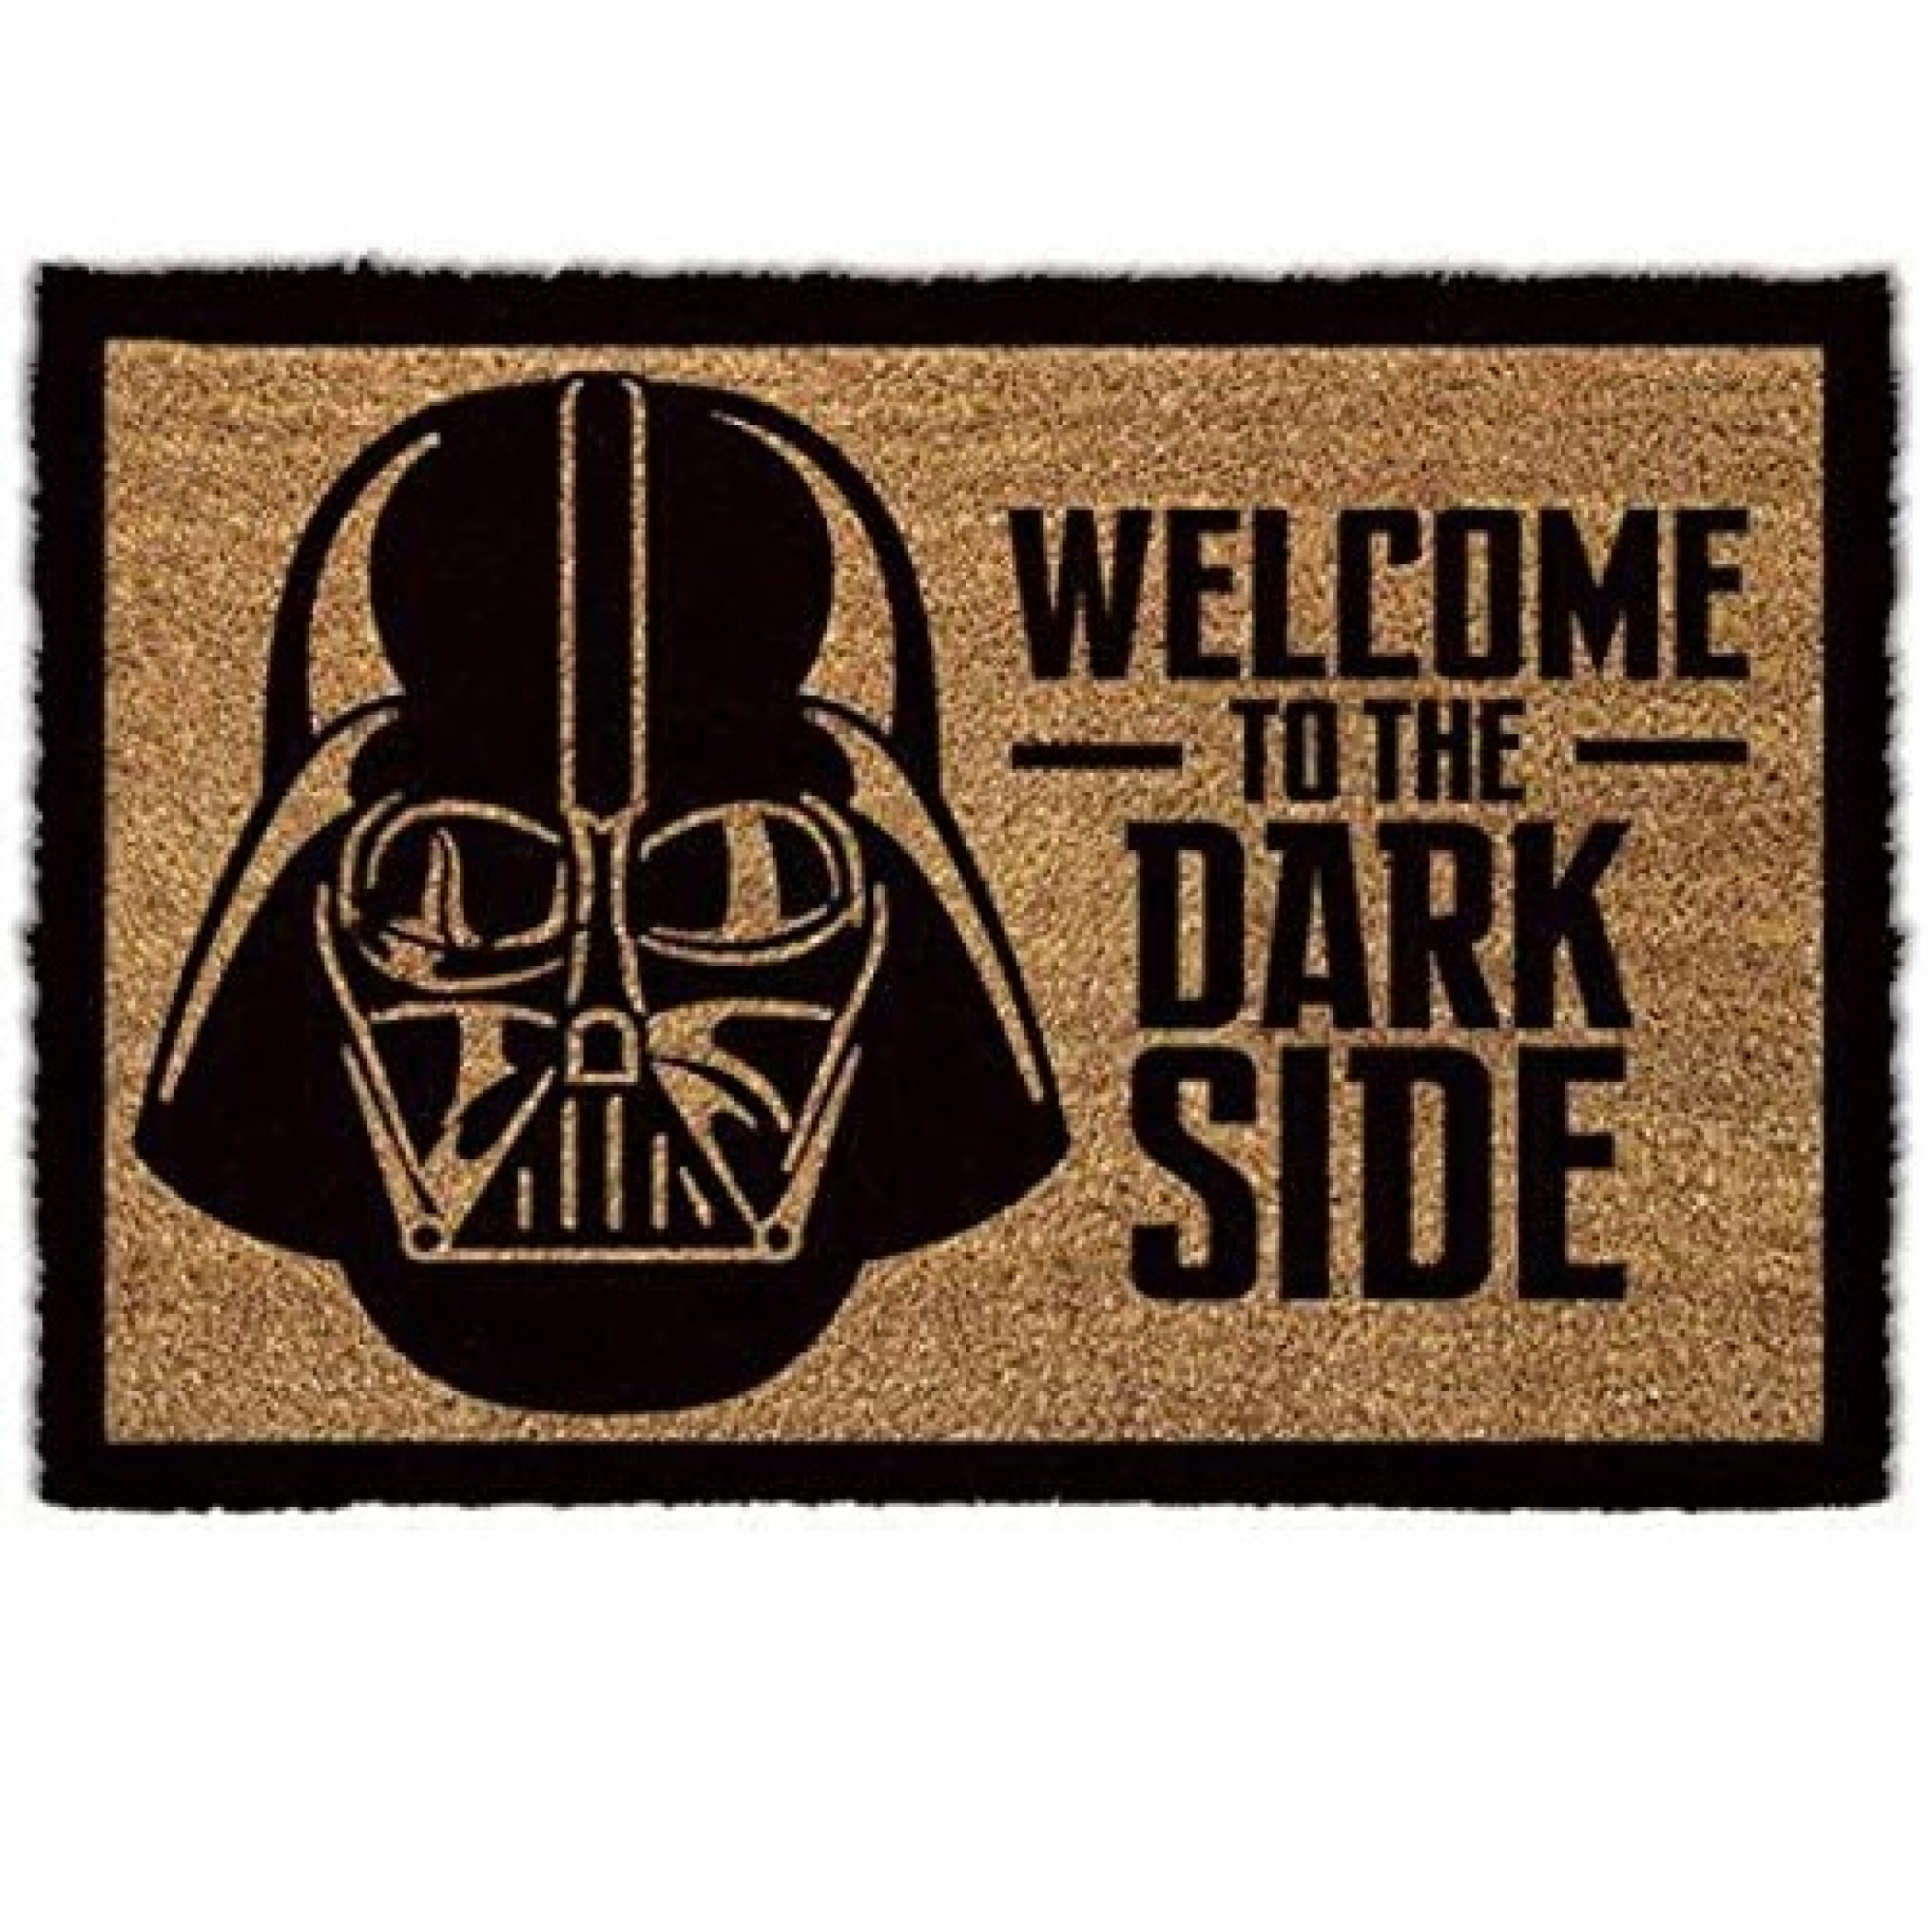 Star Wars Welcome to the Dark Side 17"x 29.5" Doormat with Non-Skid Back